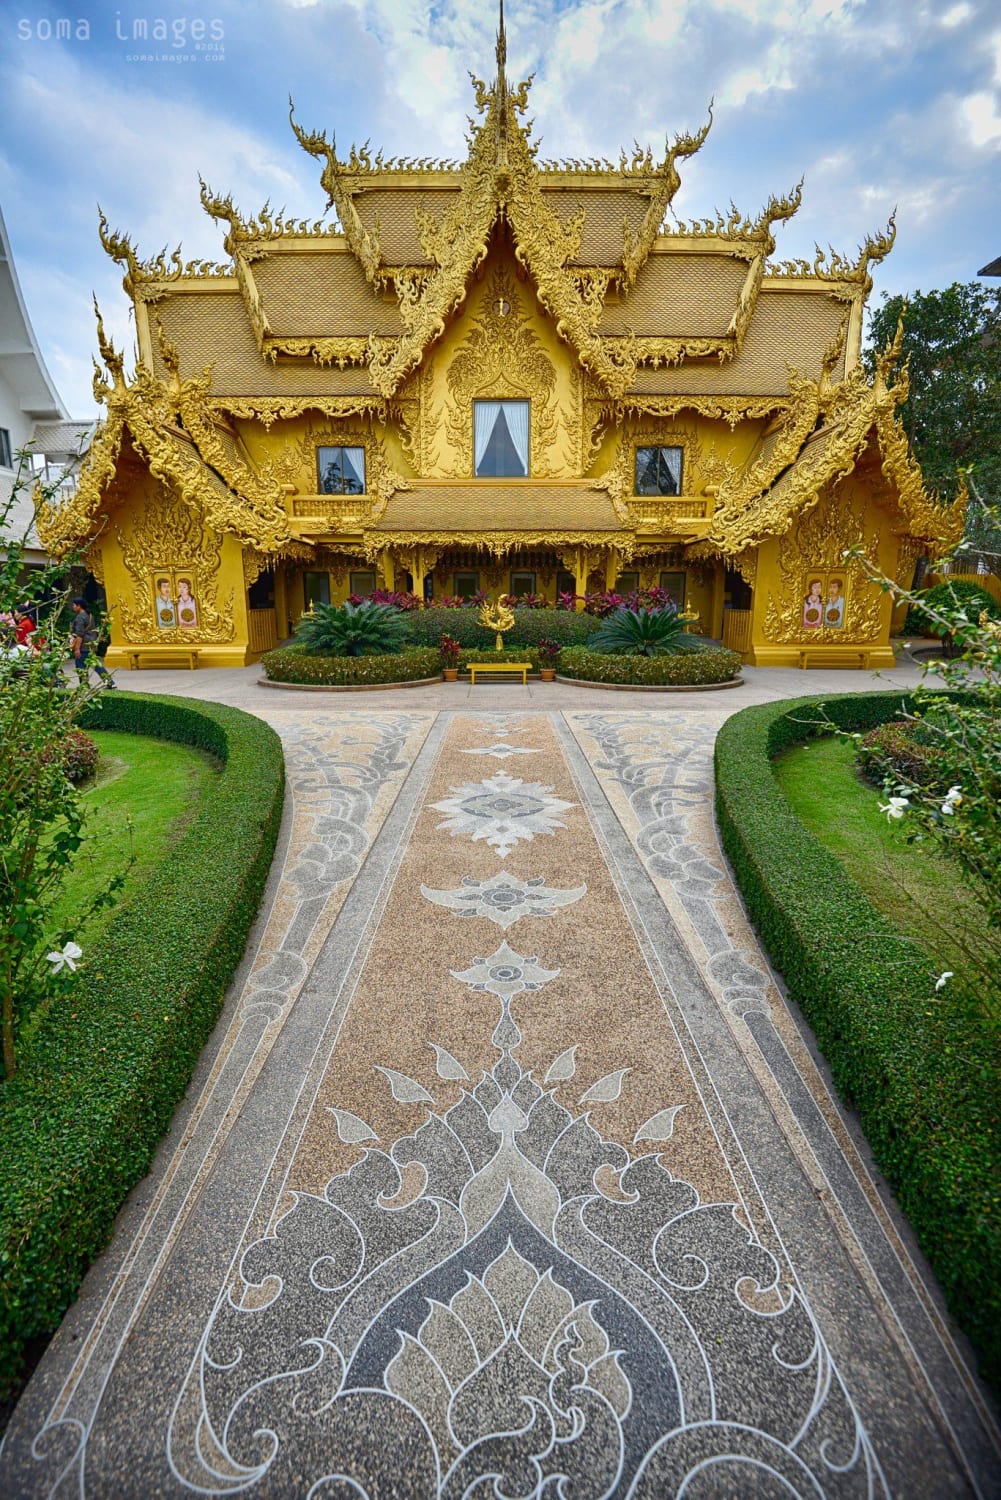 Possibly the most beautiful public toilet on Earth, Chiang Rai - Thailand.